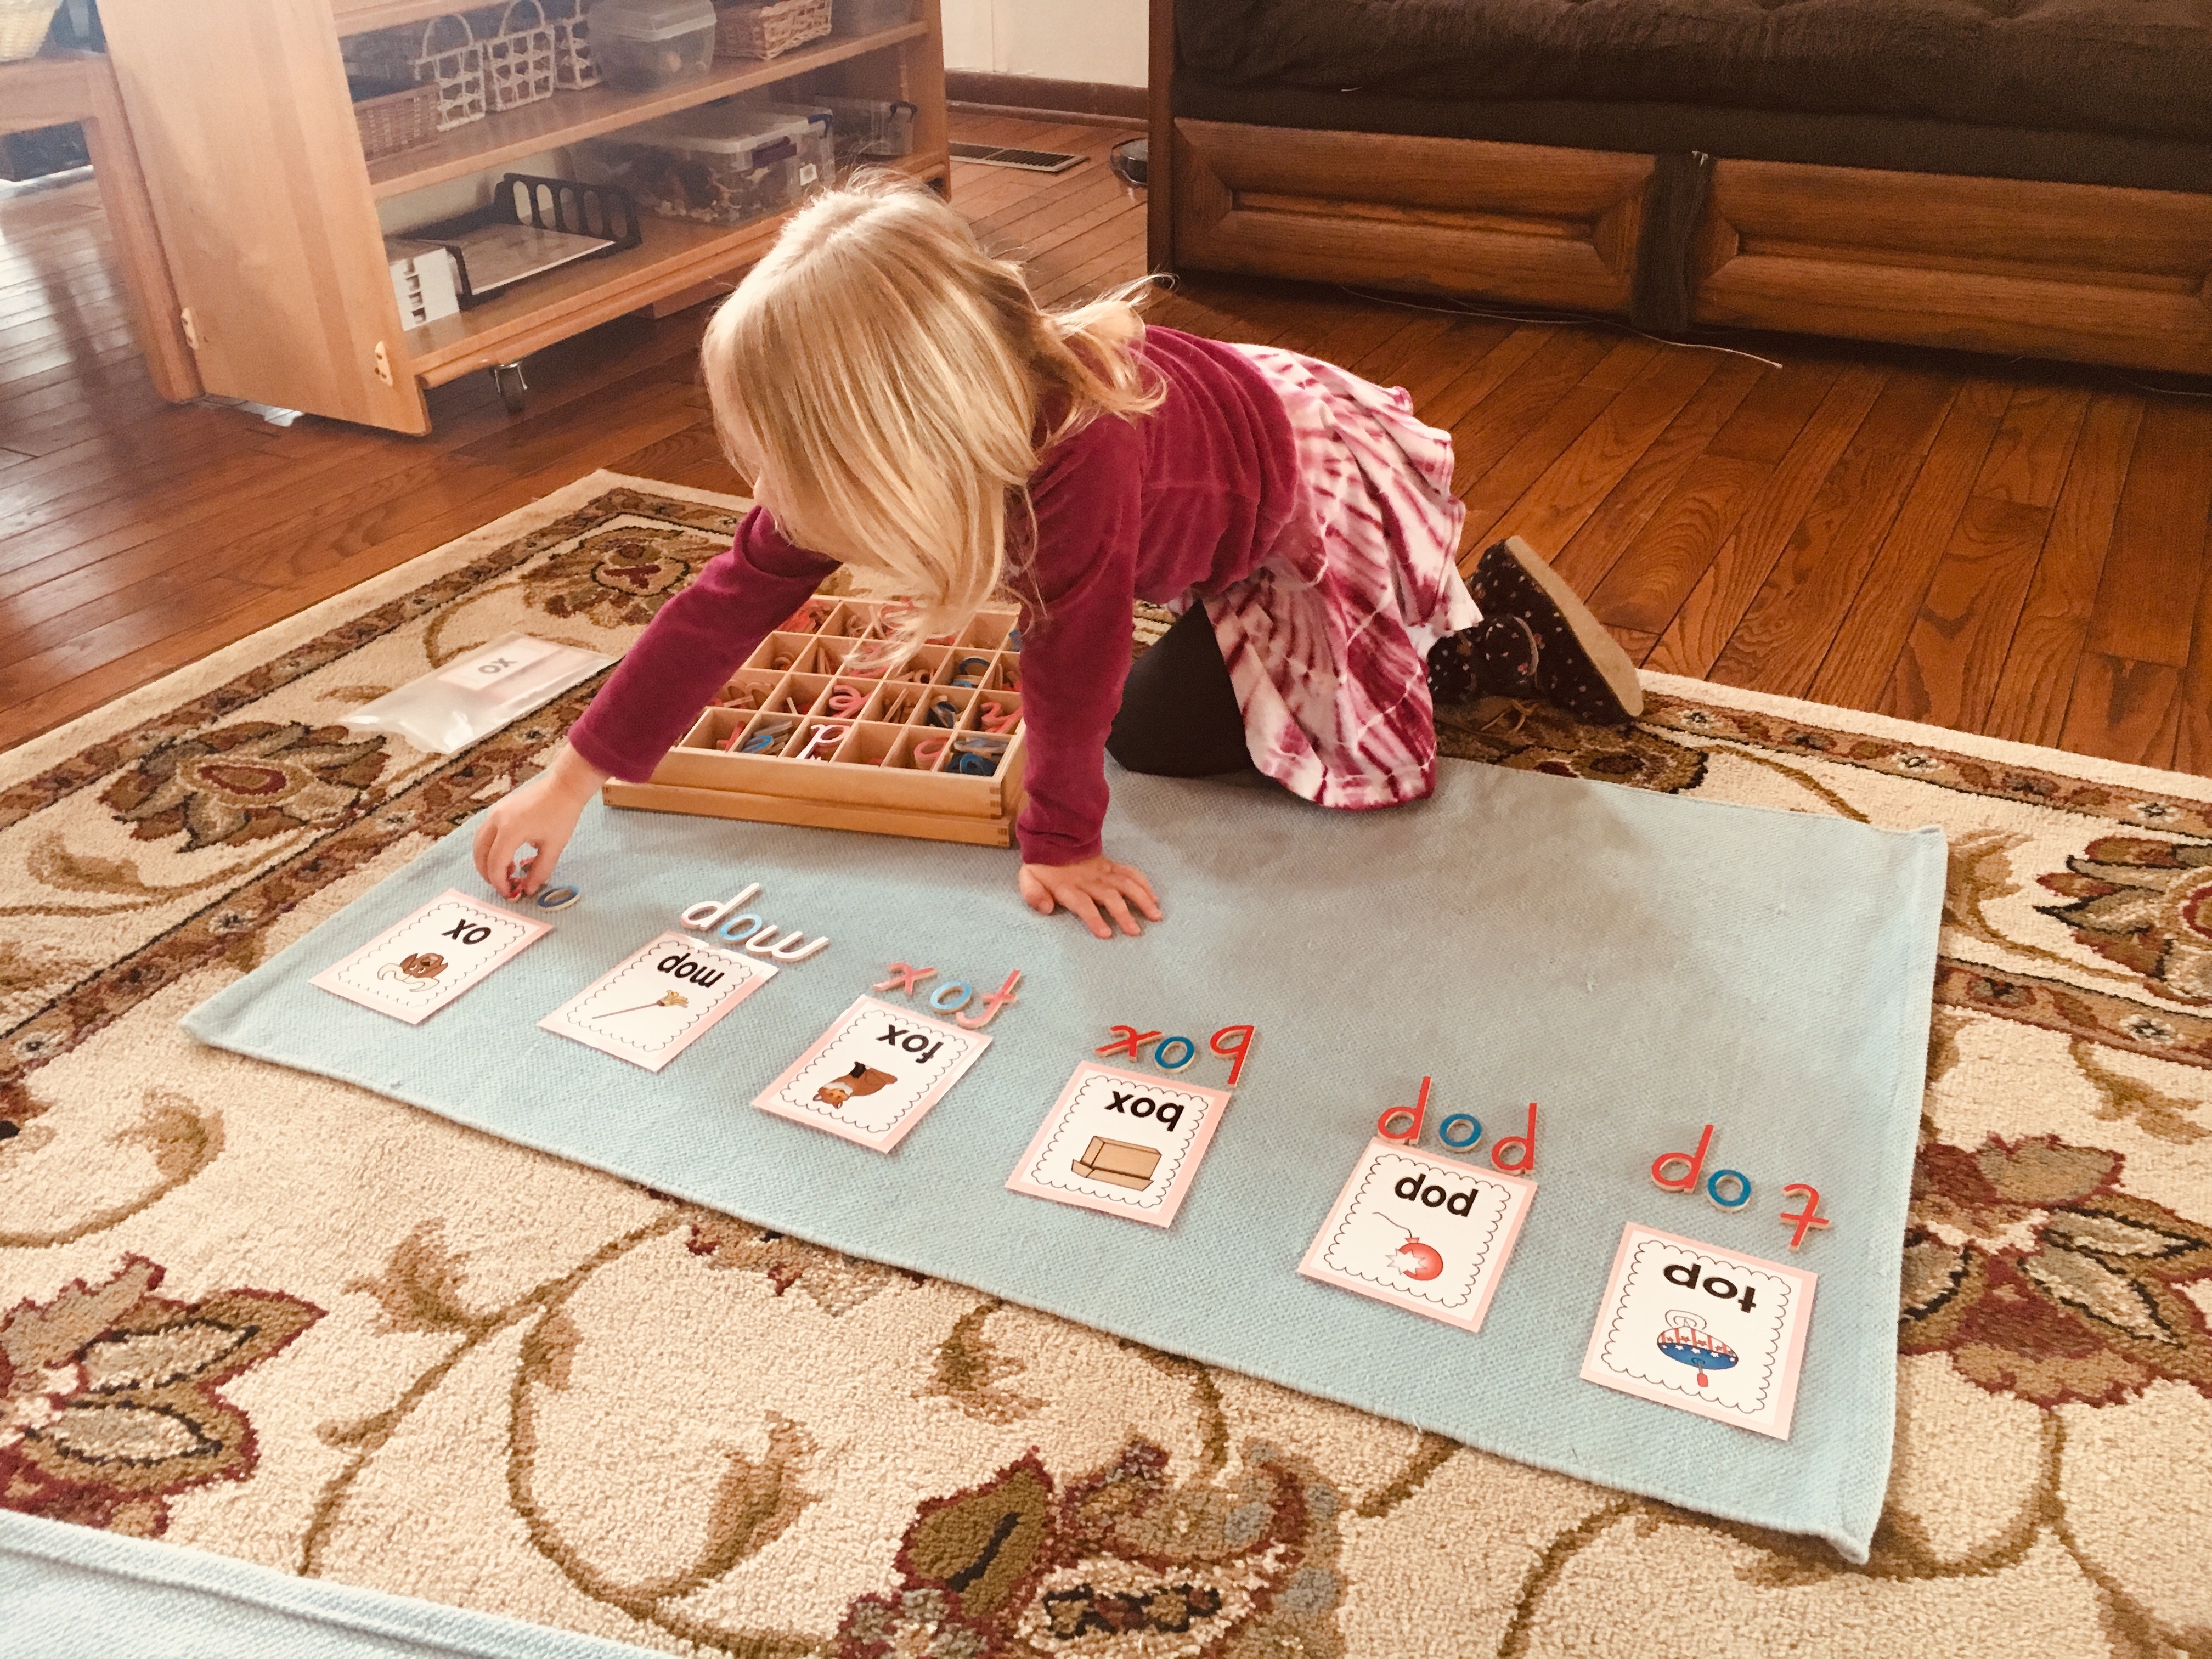 Trinity, age 4, spells out words show on cards, using letters from the moveable alphabet box.